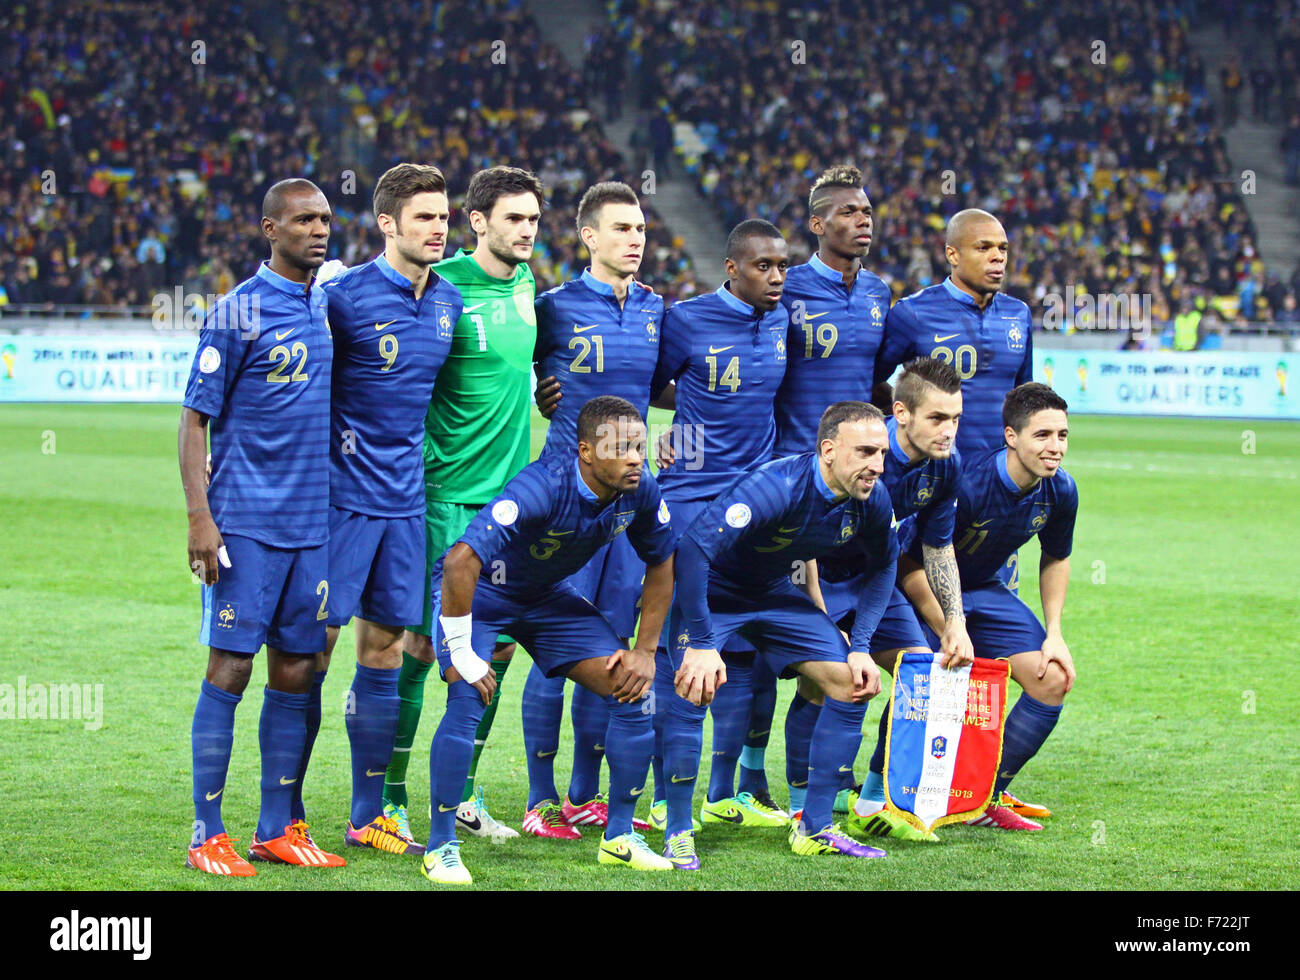 KYIV, UKRAINE - NOVEMBER 15, 2013: France national football team pose for a group photo before FIFA World Cup 2014 qualifier game against Ukraine on November 15, 2013 in Kyiv, Ukraine Stock Photo